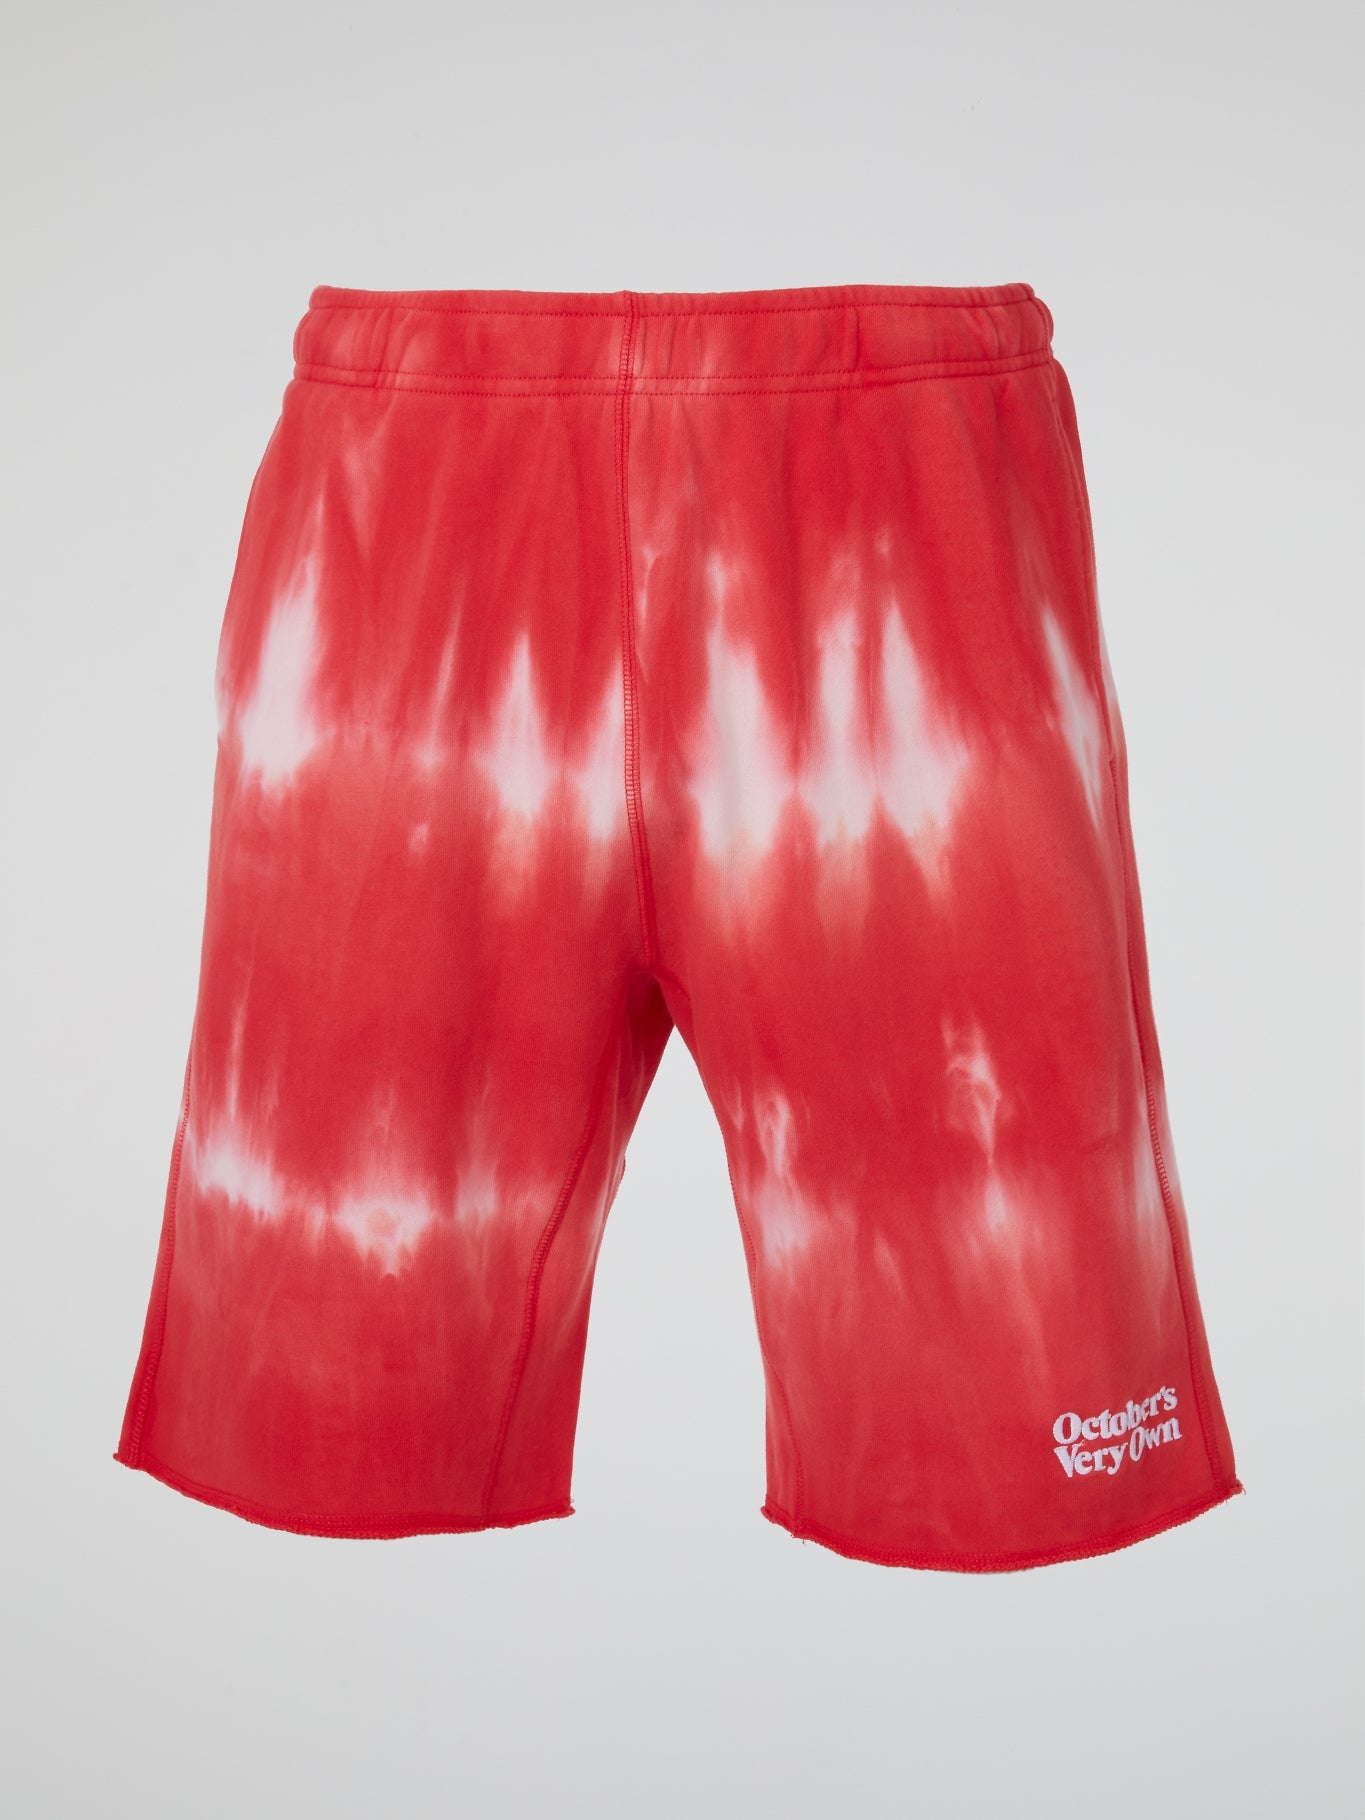 Red Marble Tie Dye Shorts